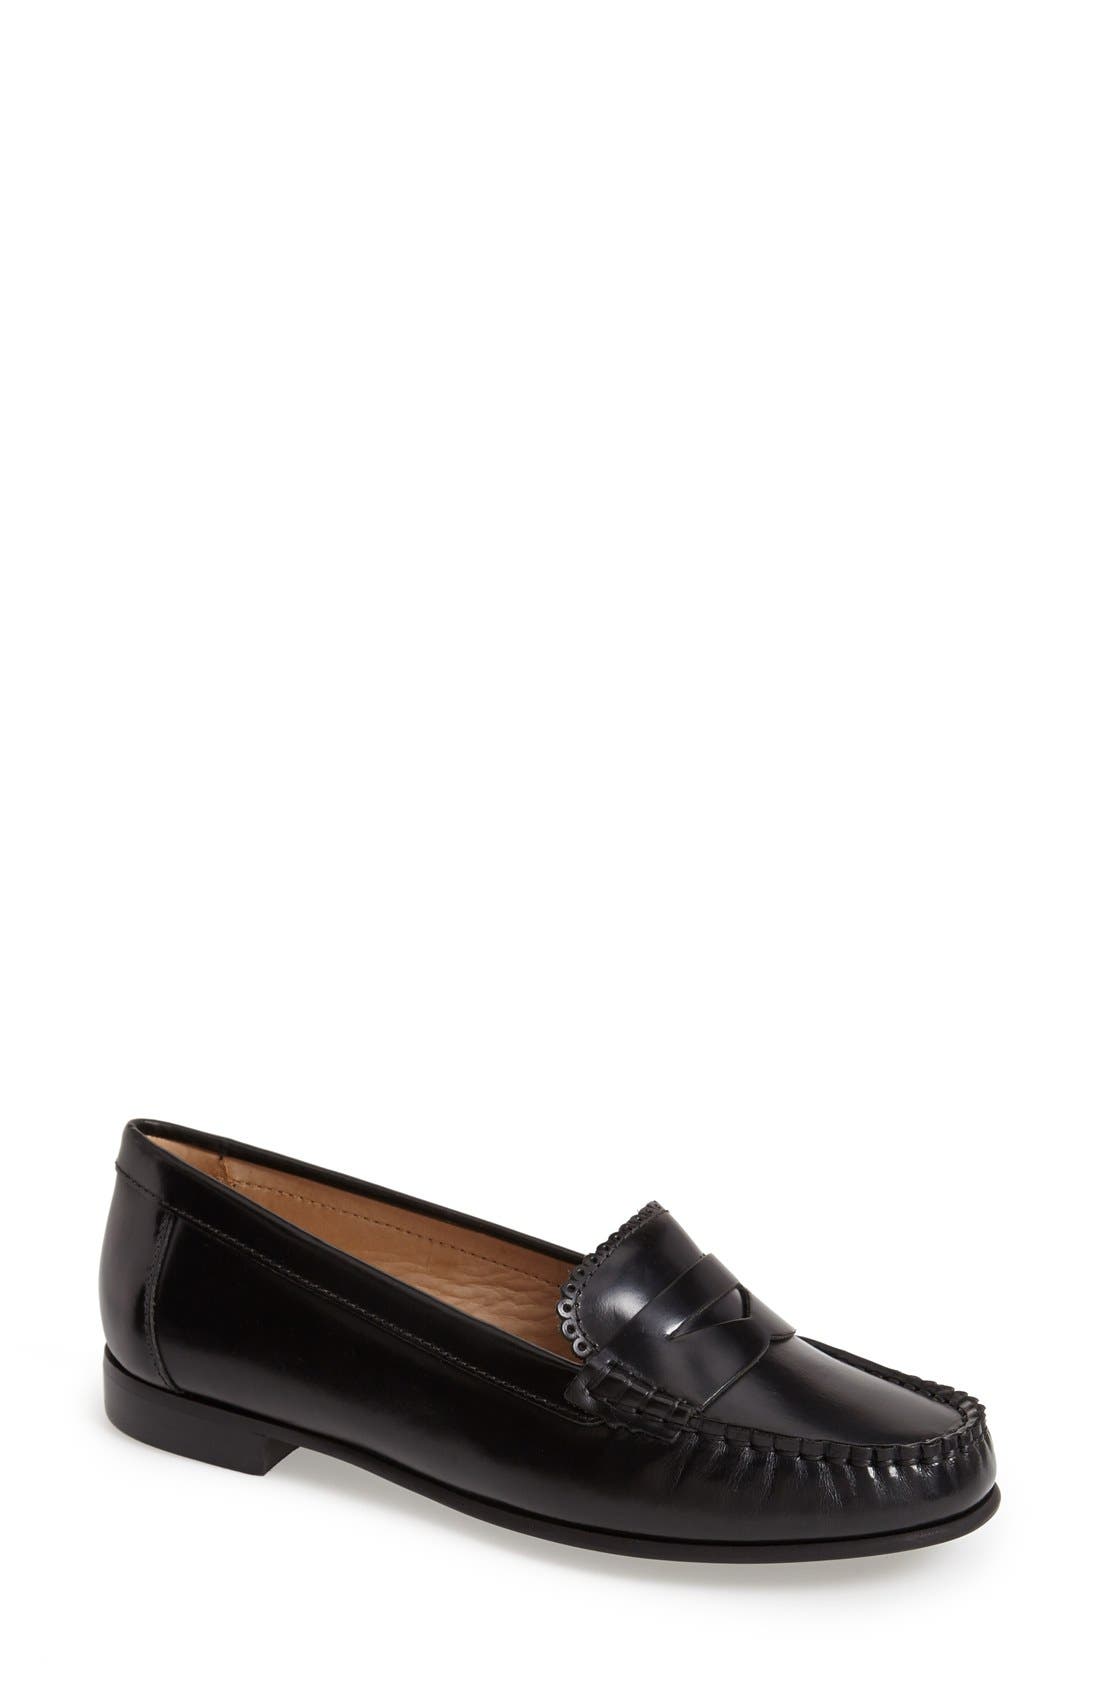 jack rogers quinn loafers